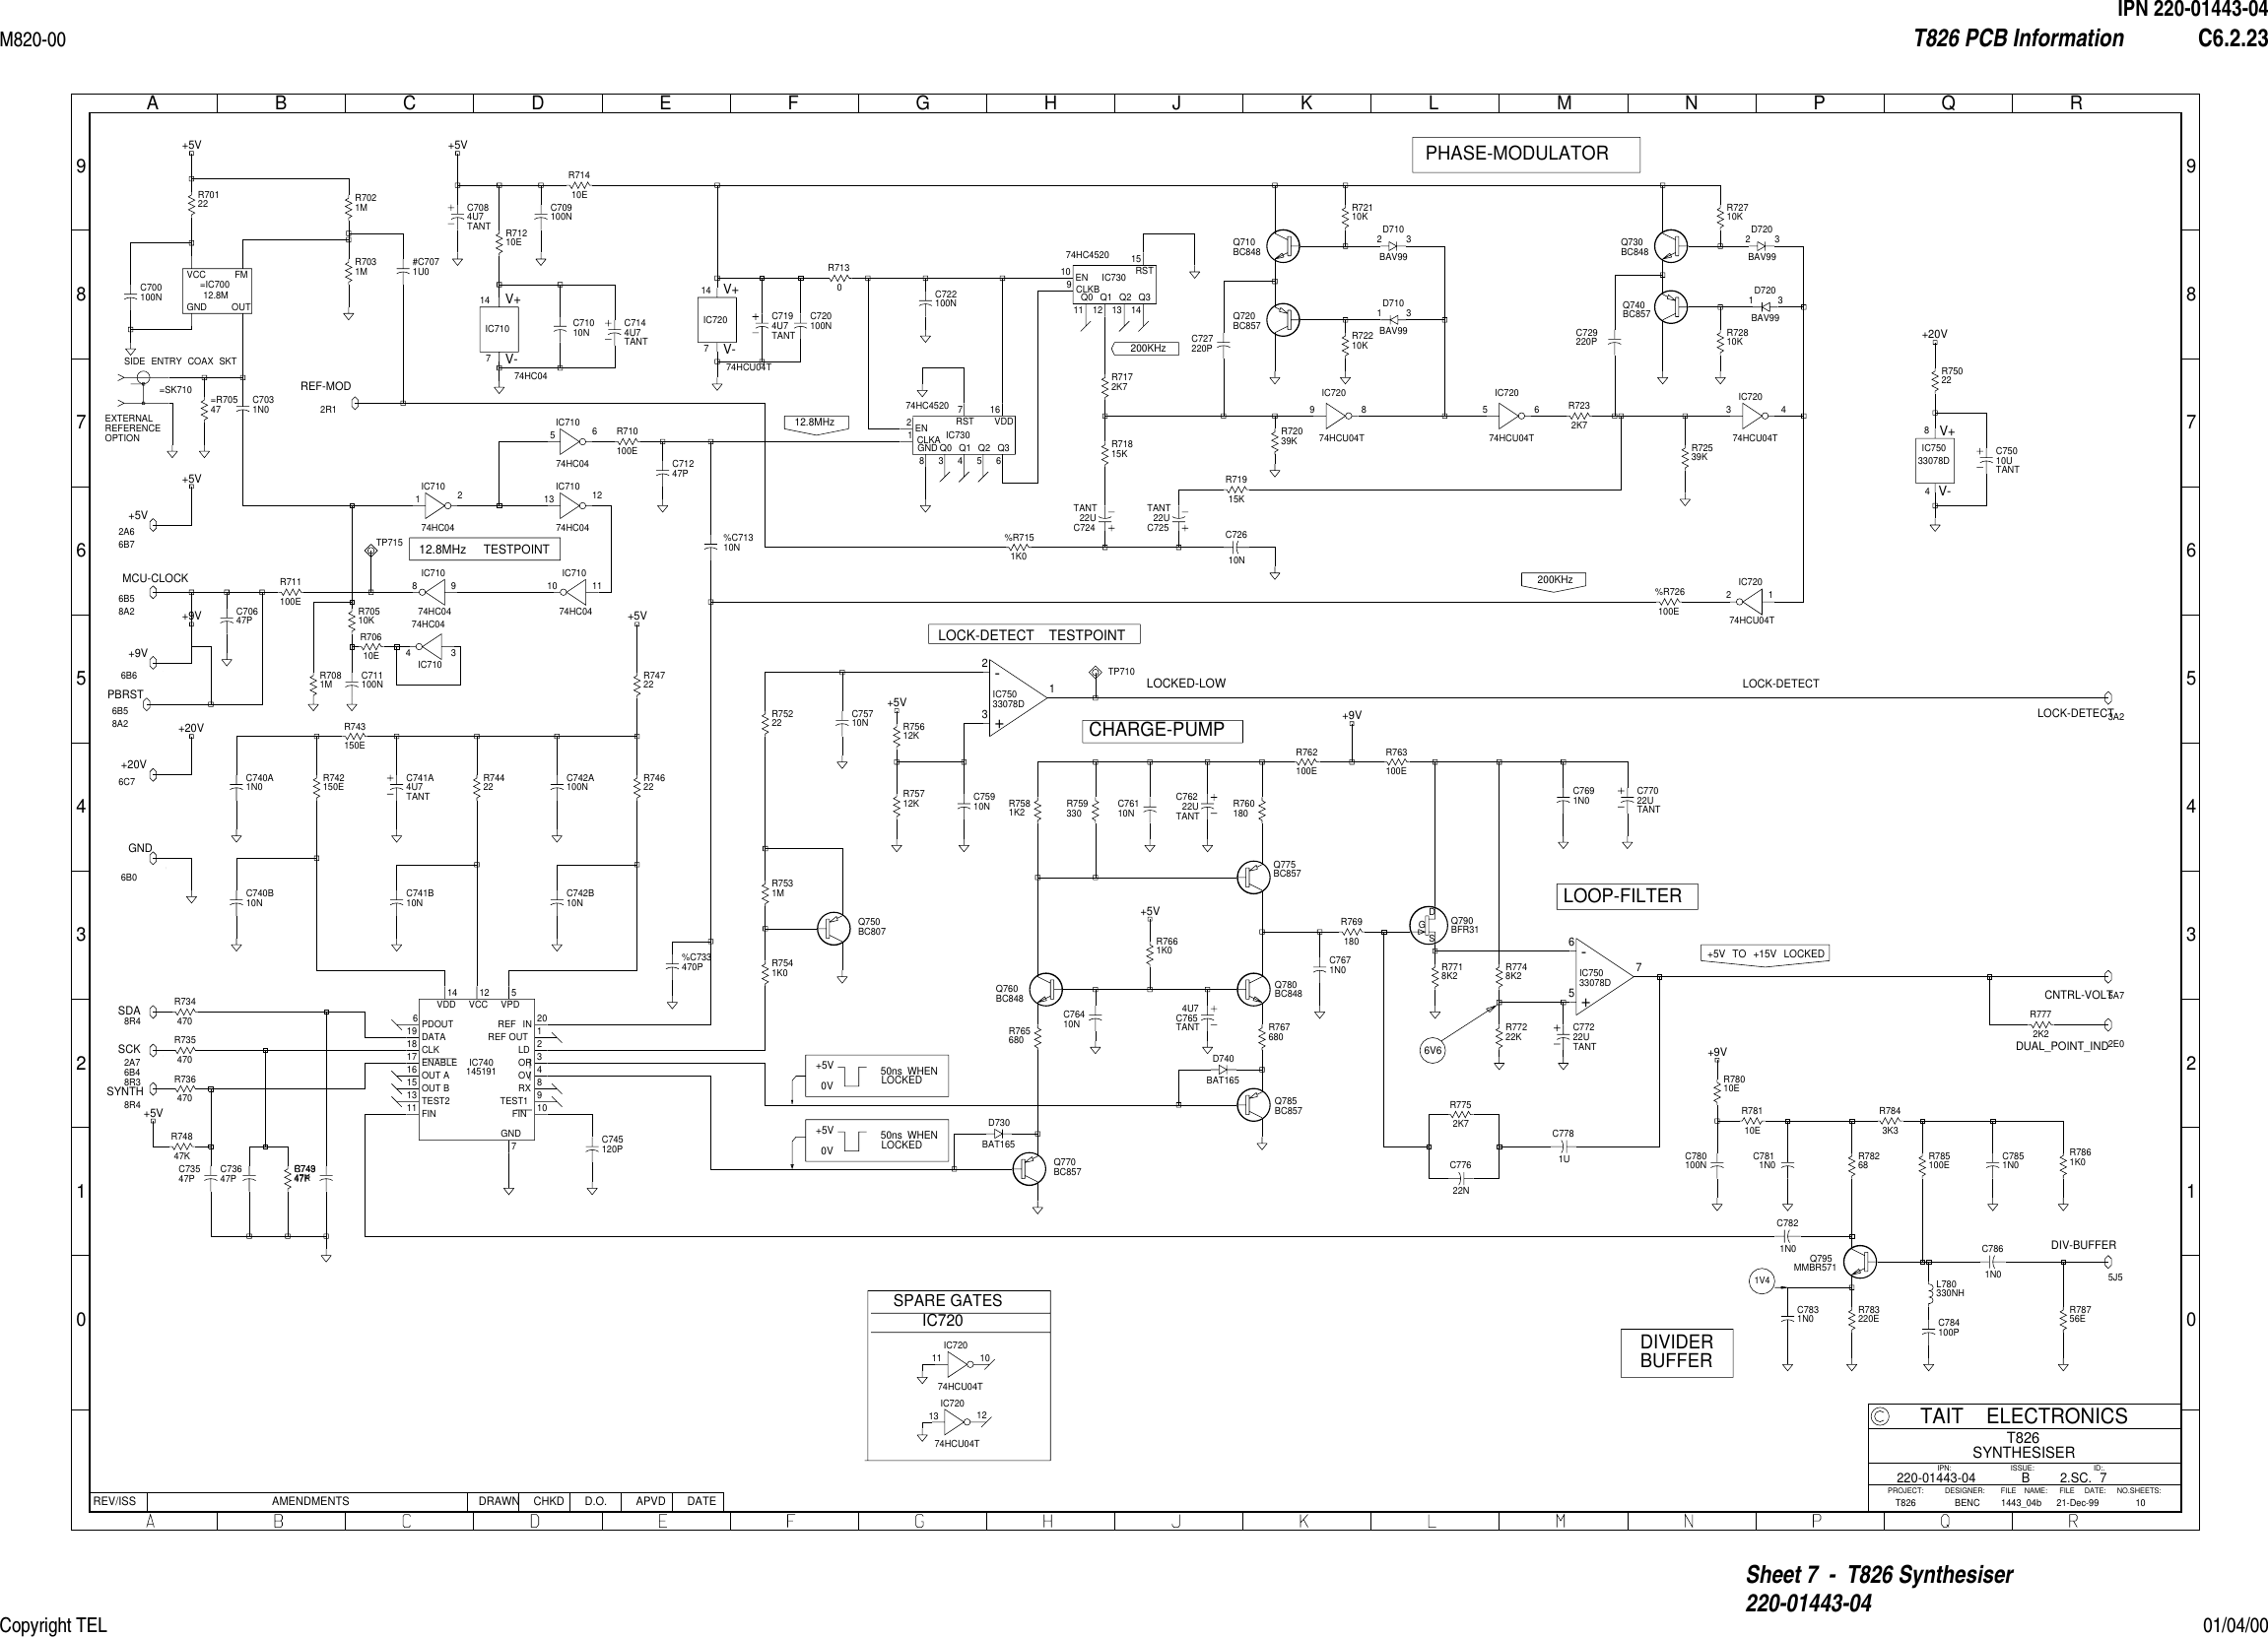 IPN 220-01443-04M820-00 T826 PCB Information C6.2.23Copyright TEL 01/04/00Sheet 7  -  T826 Synthesiser220-01443-0401234567890123456789ABCDEFGHJ KLMNPQRREV/ISS AMENDMENTS DATEAPVDD.O.CHKDDRAWNNO.SHEETS:FILE NAME:TAIT ELECTRONICSIPN:FILE DATE:ISSUE: ID:.2.SC.PROJECT: DESIGNER:710T826SYNTHESISER1443_04b220-01443-0421-Dec-99BT826 BENC  1V4IC740145191    REF IN 20REF OUT 1LD 2OR 3OV 4RX 8TEST1 9FIN 10GND7VPD5VCC12VDD14PDOUT6DATA19CLK18ENABLE17OUT A16OUT B15TEST213FIN11R78010E    R785100E    R7861K0    C7811N0    C7831N0    R78756E    C784100P    C7821N0    R70122        12.8M=IC700GND OUTVCC FMR7031M    R7021M    C700100N    C709100N    C71010N    R71410E    C7031N0    IC71074HC04    V-7V+14IC71074HC04    12IC71074HC04    98IC73074HC4520    EN2CLKA1GND8Q03Q14Q25Q36RST7VDD16IC73074HC4520    EN10CLKB9Q011Q112Q213Q314RST15R711100E    C722100N    R7130    TANTC7084U7    R7172K7    R71815K    C727220P    R72110K    R72210K    R7232K7    C729220P    R72810K    IC75033078D    V-4V+8+-IC75033078D    567C77622N    %C71310N    %R7151K0    C741B10N    R74422    C740B10N    R742150E    R74622    R74722    C742B10N    C742A100N    TANTC741A4U7    R767680    R7541K0    R7531M    R75222    C75710N    R75022    R75712K    R75612K    C75910N    TP710    C76410N     TANTC7654U7    R7661K0    R765680    R760180     R759330    C76110N     TANTC76222U    C7671N0    R769180    R762100E    R7718K2    R763100E    TANTC77022U    TANTC77222U    C7691N0    R7748K2    R77222K    R7752K7    R783220E    C780100N     C74347P    C73647P    C73547P    R74847K    R71915K    C72610N    R72710K    %R726100E    %C733470P    R78110E    C7861N0    C745120P    #C7071U0    R74947K    TANTC72422U    =R70547    =SK710SIDE ENTRY COAX SKT    IC71074HC04    13 12IC72074HCU04T    V-7V+14IC71074HC04    56IC72074HCU04T    98IC72074HCU04T    56IC72074HCU04T    34IC72074HCU04T    12+-IC75033078D    321R743150E    C740A1N0    IC71074HC04    1110R710100E    IC71074HC04    34IC72074HCU04T    13 12IC72074HCU04T    11 10C720100N    Q710BC848    Q720BC857    Q730BC848    Q740BC857    Q750BC807    Q770BC857    Q760BC848    Q780BC848    Q785BC857    Q775BC857    DSGQ790BFR31    Q795MMBR571    D710BAV99    23 D720BAV99    23D710BAV99    31D720BAV99    31D730BAT165    D740BAT165    C71247P    TANTC72522U    R72039K     R72539K    R7581K2     R7772K2    TP715    C70647P    R78268    R7843K3    L780330NH    R71210E    TANTC7194U7    R70610E    C711100N    R70510K    R7081M    TANTC7144U7    R736470    R735470    R734470    TANTC75010U    C7851N0    C7781U    +9V+5V +5V+5V+5V+5V+9V+5VGND1R01R02R33R84Q15A36B08A09C5MCU-CLOCK6B58A2SDA8R4SCK6B48R38R3SYNTH8R4REF-MOD2R1+5V2A66B7+9V6C78A1+20V6C7+5V+9V+20V+20VLOCK-DETECT3A2DIV-BUFFER5J5CNTRL-VOLT5A7DUAL_POINT_IND2E0PBRST6B58A2SPARE GATESIC720LOCK-DETECT TESTPOINTLOCKED-LOWEXTERNALREFERENCEOPTION6B66B02A76B48R312.8MHz TESTPOINTLOOP-FILTERDIVIDERBUFFERCHARGE-PUMPPHASE-MODULATOR6V612.8MHz200KHz200KHz+5V TO +15V LOCKED50ns WHEN+5V0V LOCKED50ns WHEN+5V0V LOCKEDLOCK-DETECT